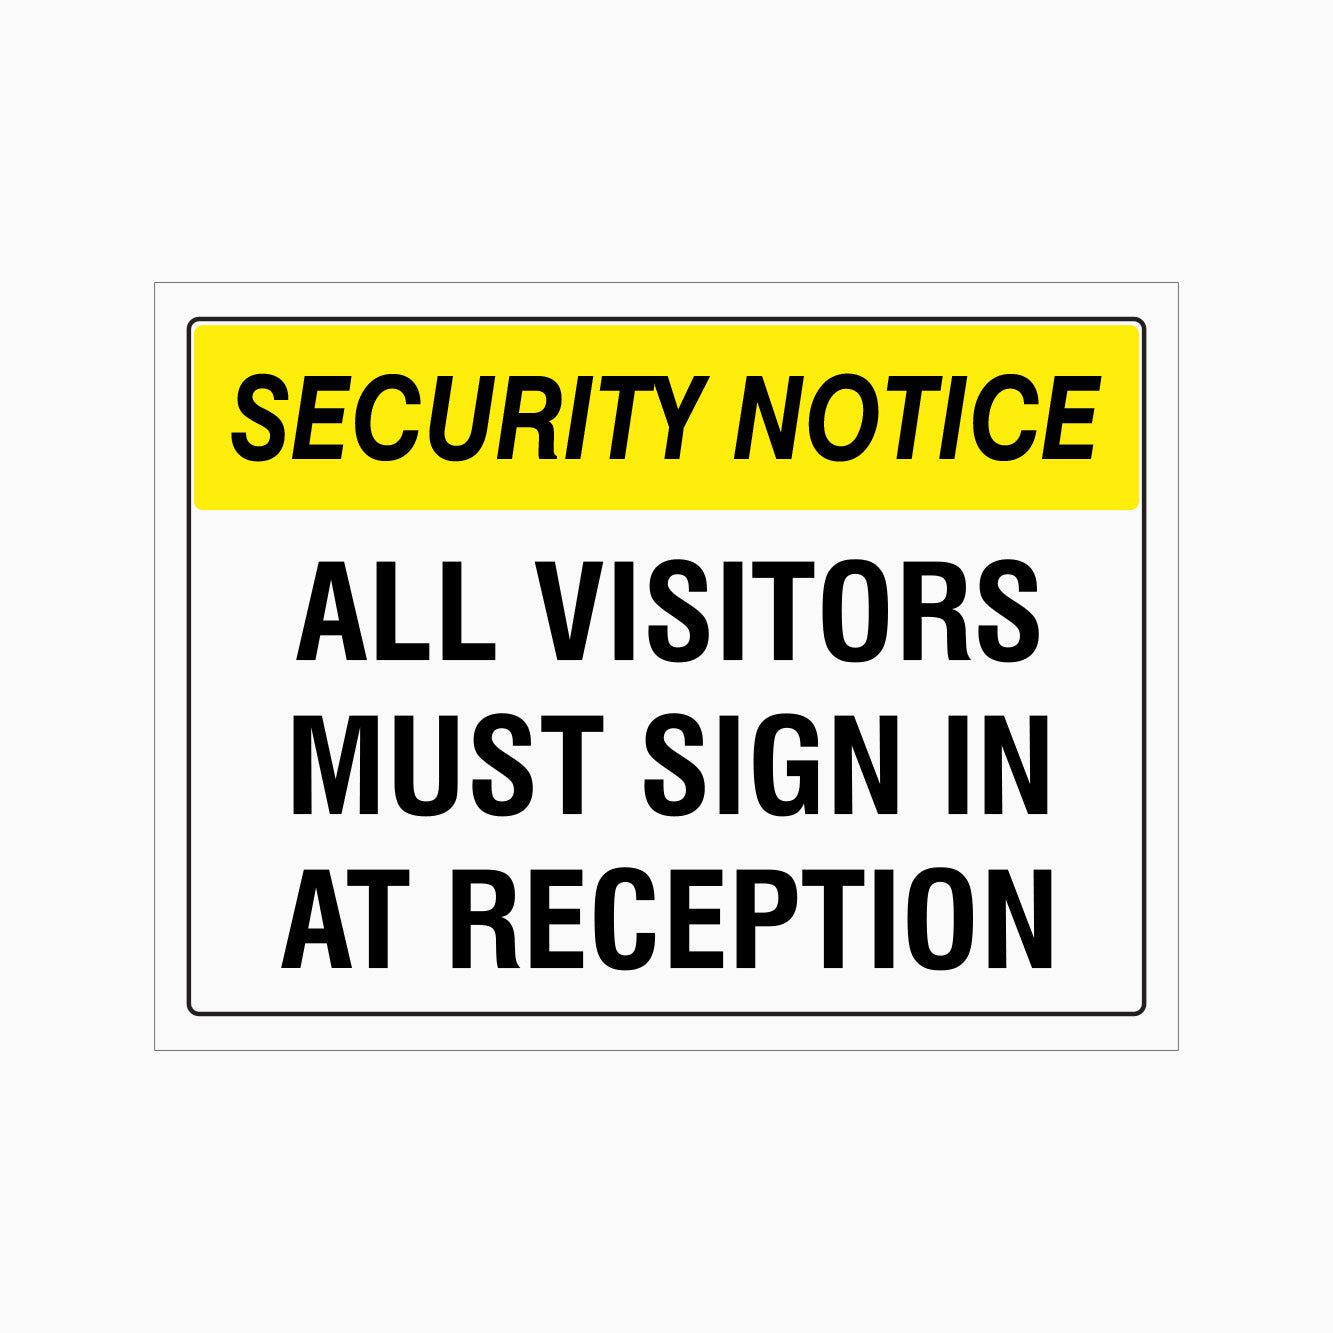 SECURITY NOTICE SIGN - ALL VISITORS MUST SIGN IN AT RECEPTION SIGN